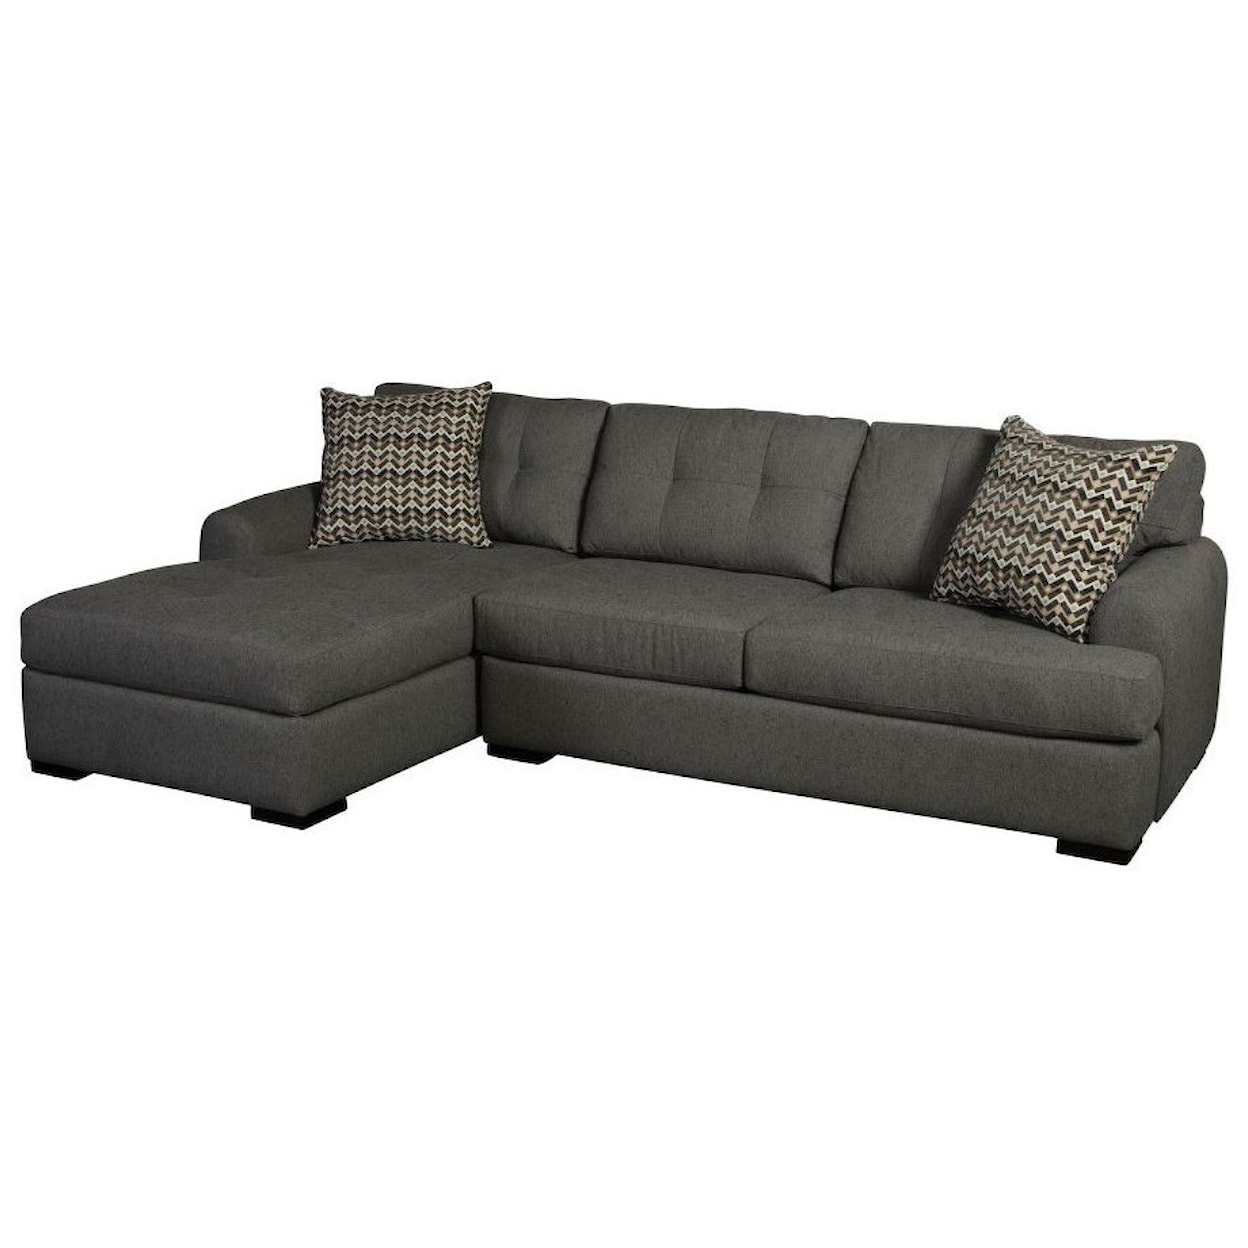 Jonathan Louis Crosby 3-Seat Chaise Sectional with LAF Chaise